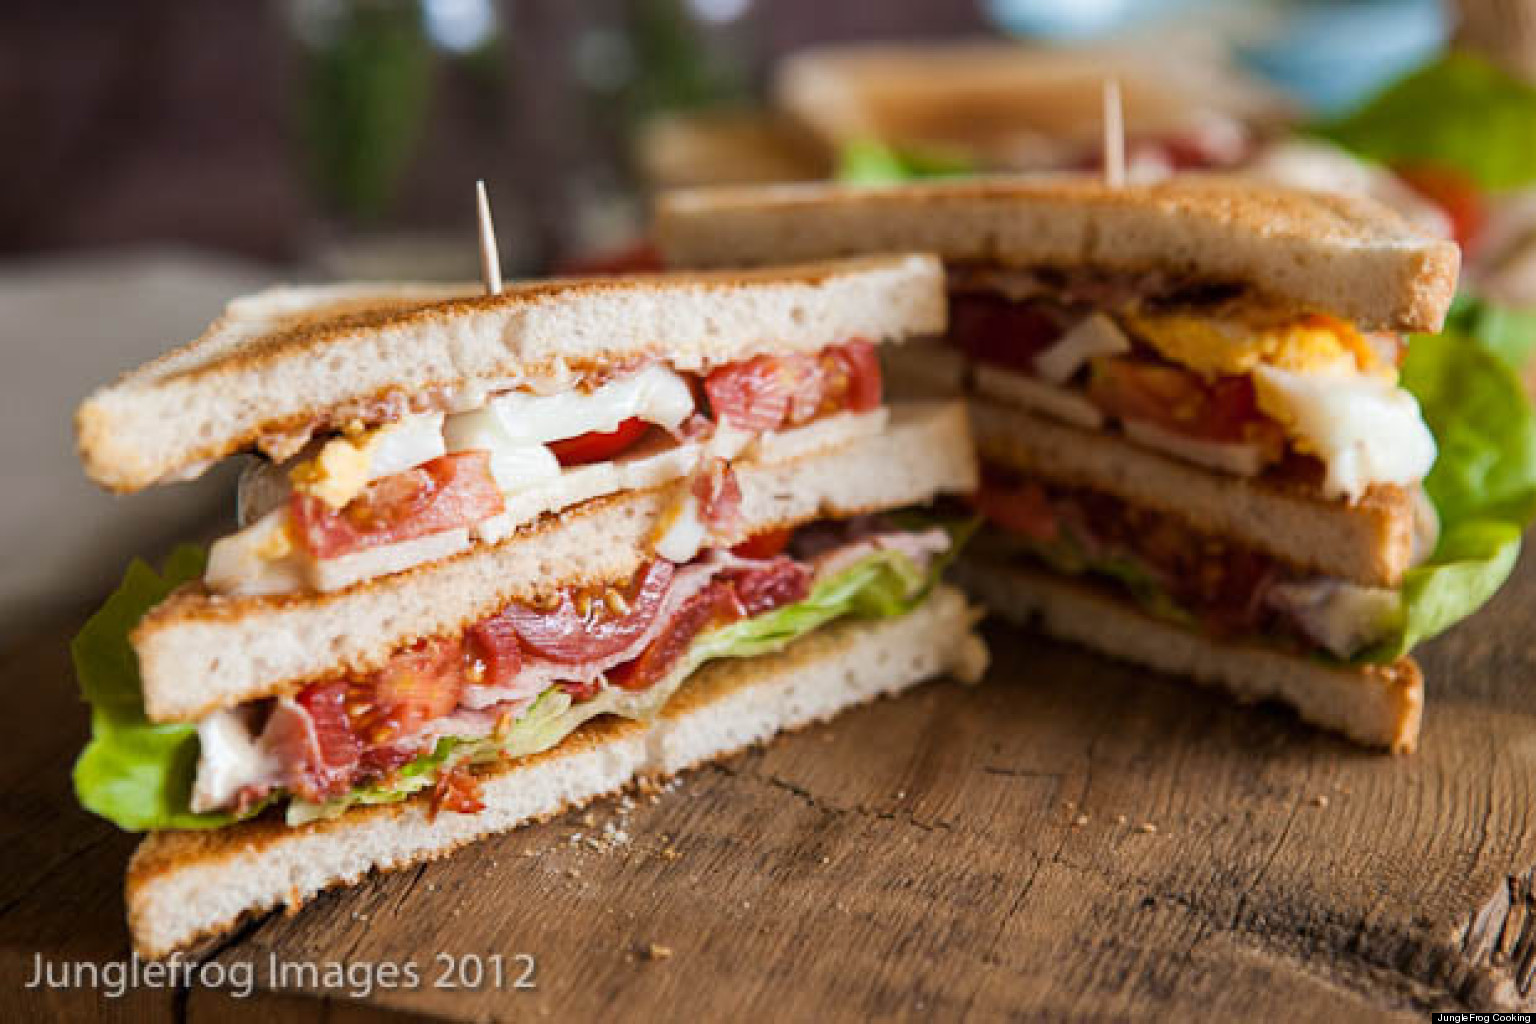 Club Sandwich Recipes: Turkey Is Amazing, But We Want More Variety PHOTOS  HuffPost